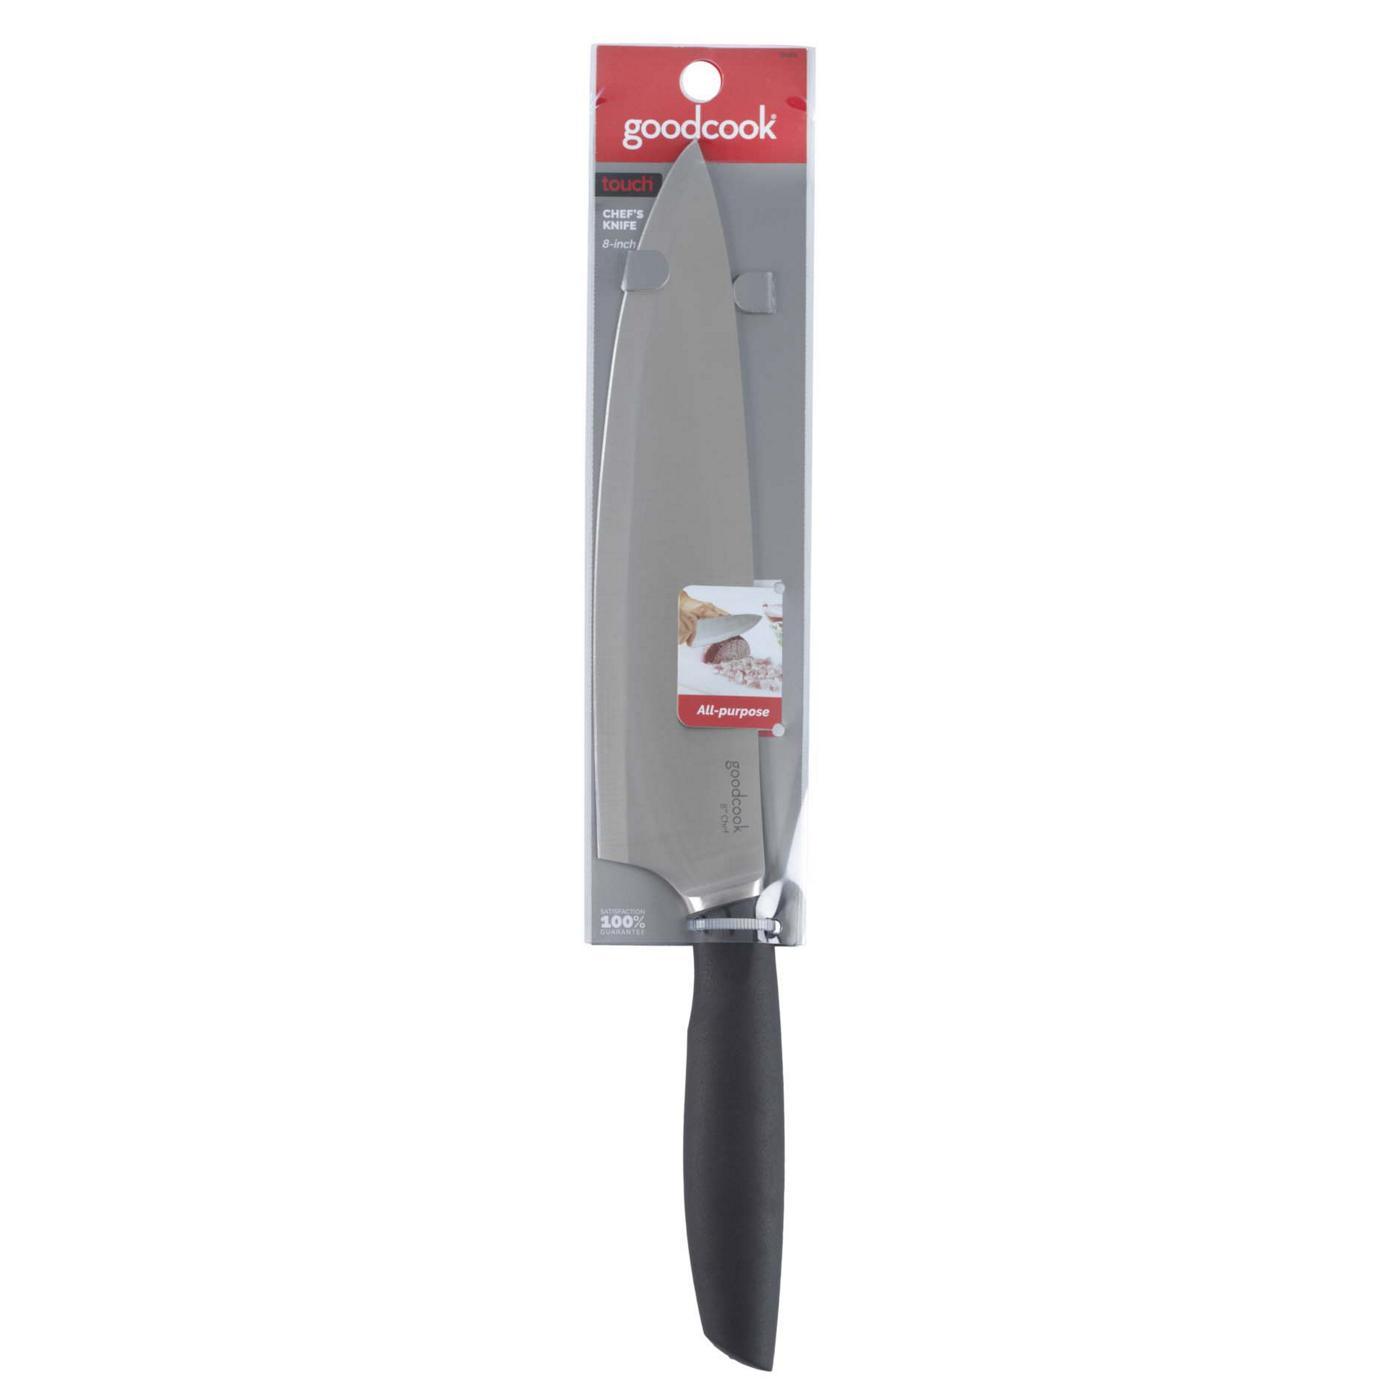 GoodCook Touch Chef's Knife; image 1 of 4